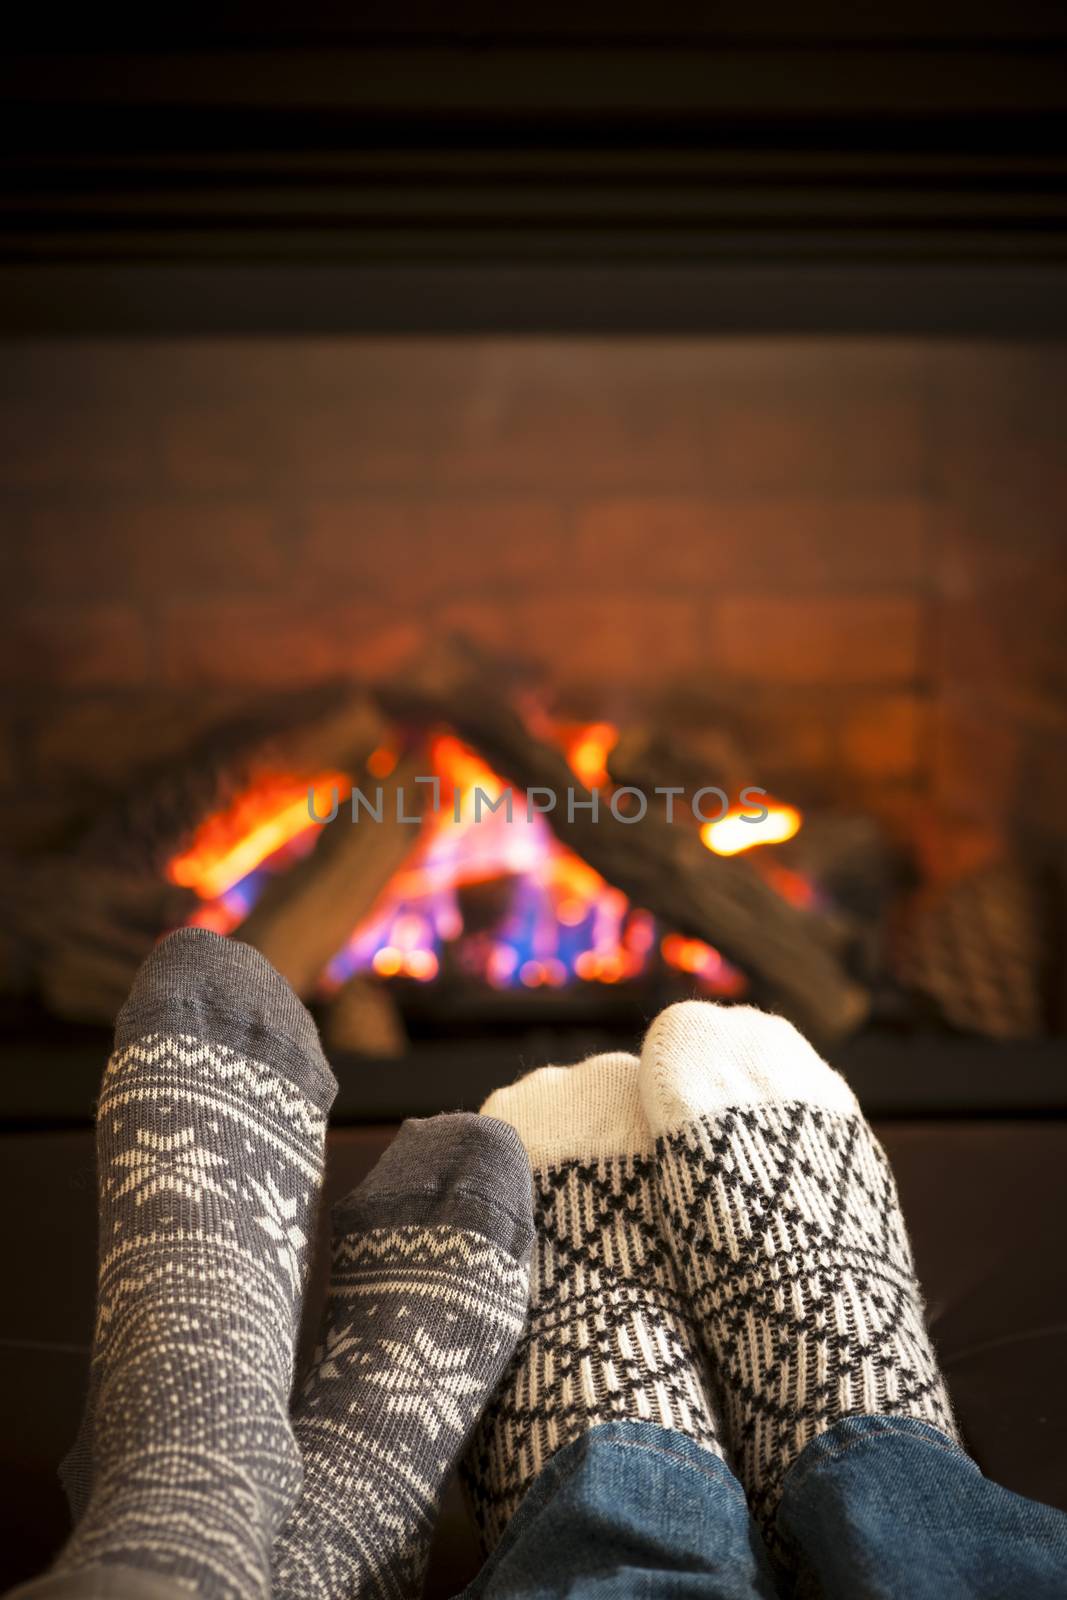 Feet warming by fireplace by elenathewise